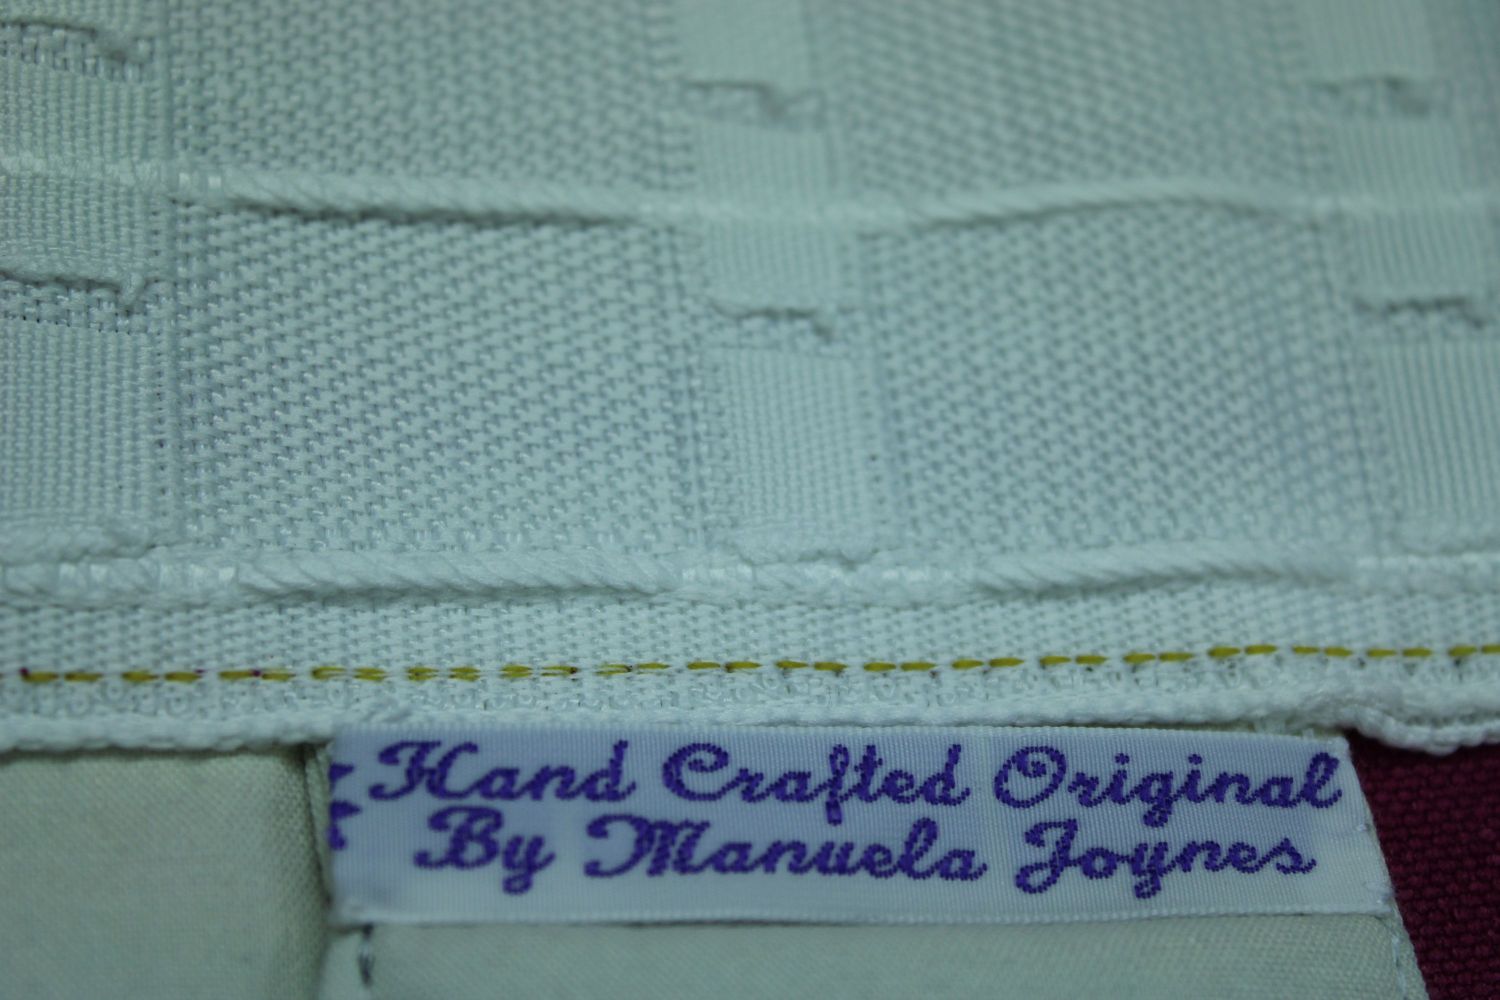 image of finish of top of curtain with label